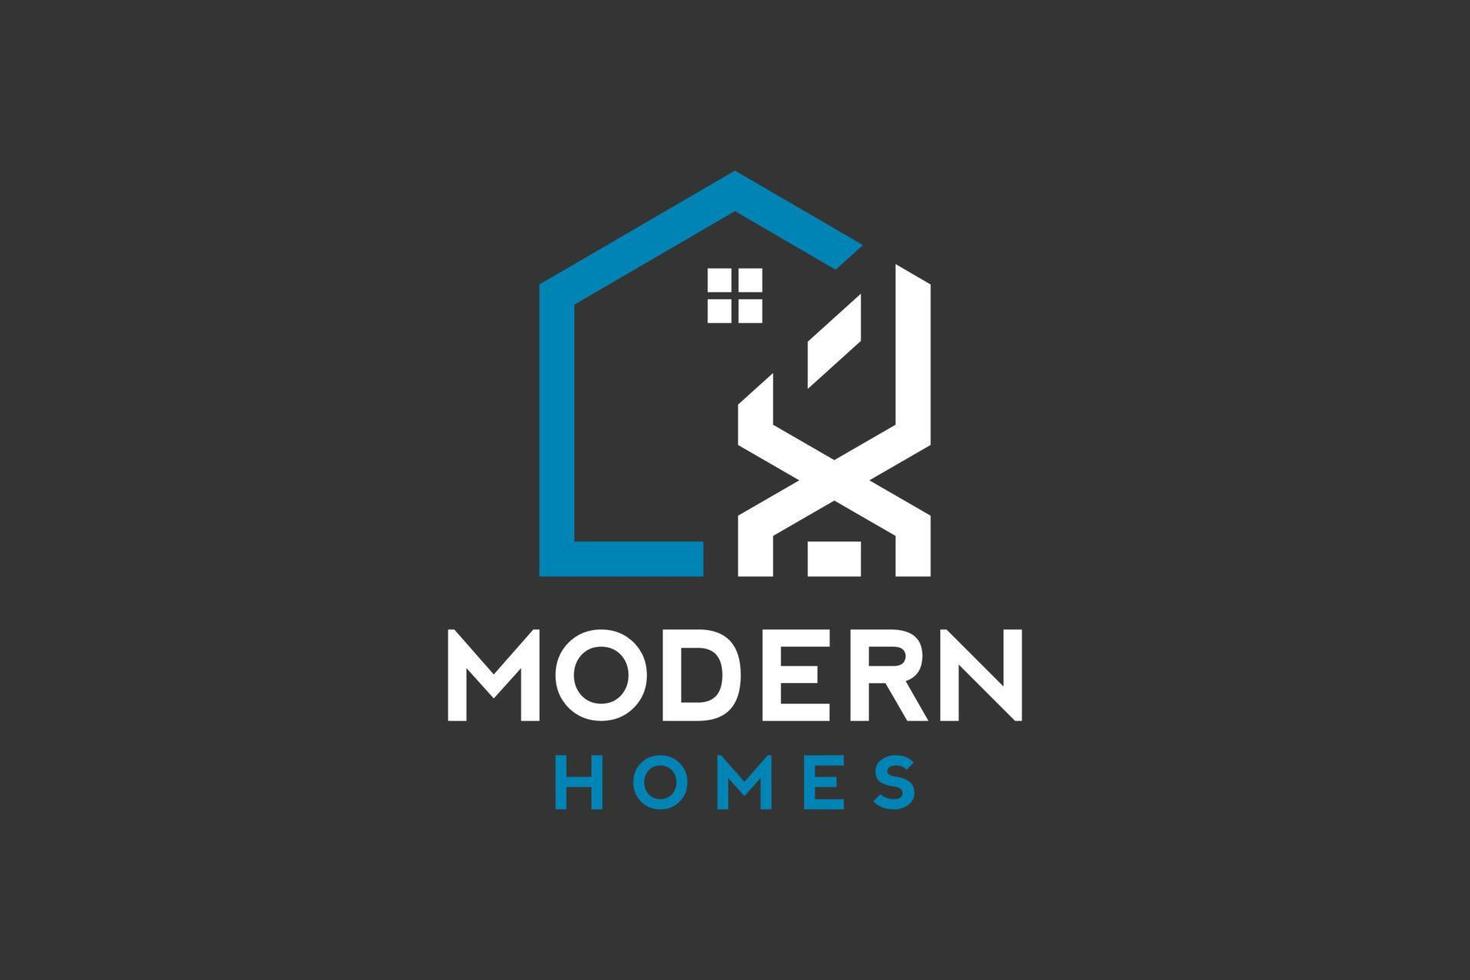 Logo design of X in vector for construction, home, real estate, building, property. Minimal awesome trendy professional logo design template.